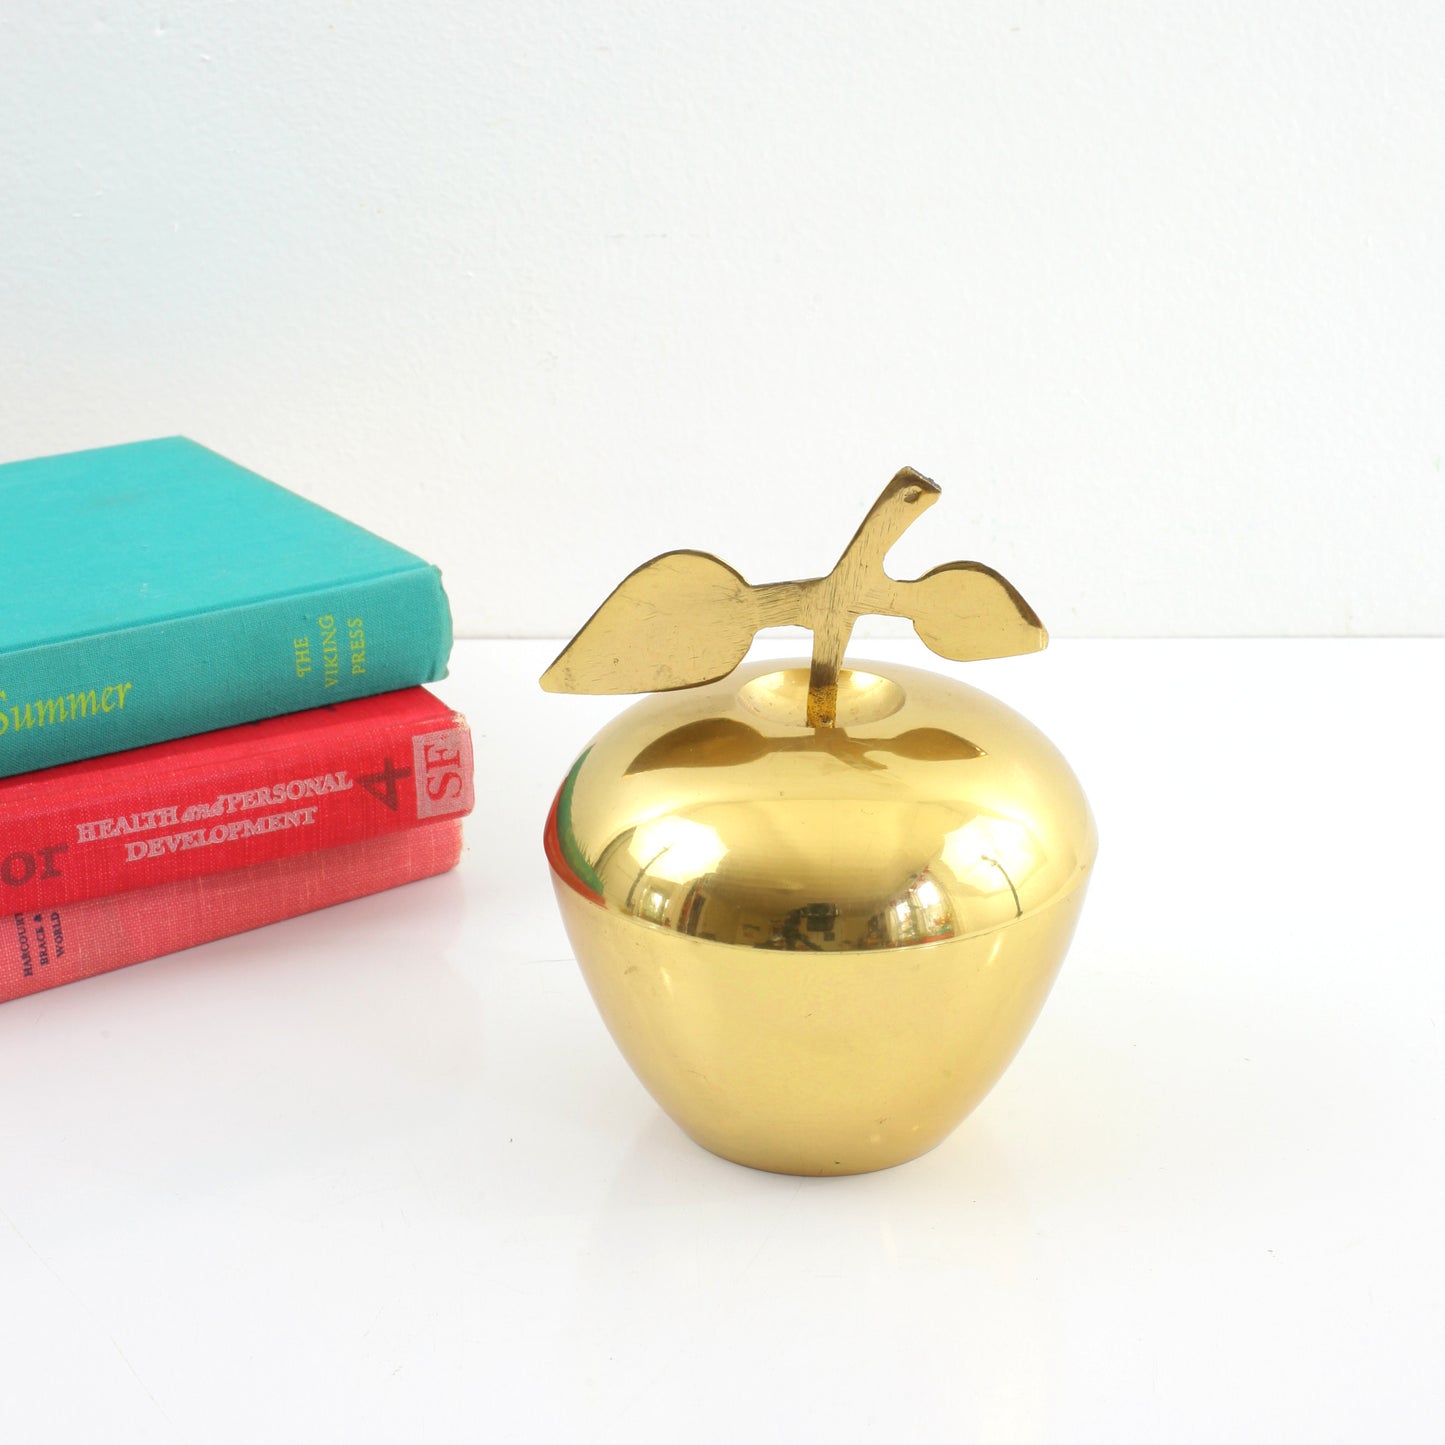 SOLD - Vintage Brass Apple Container